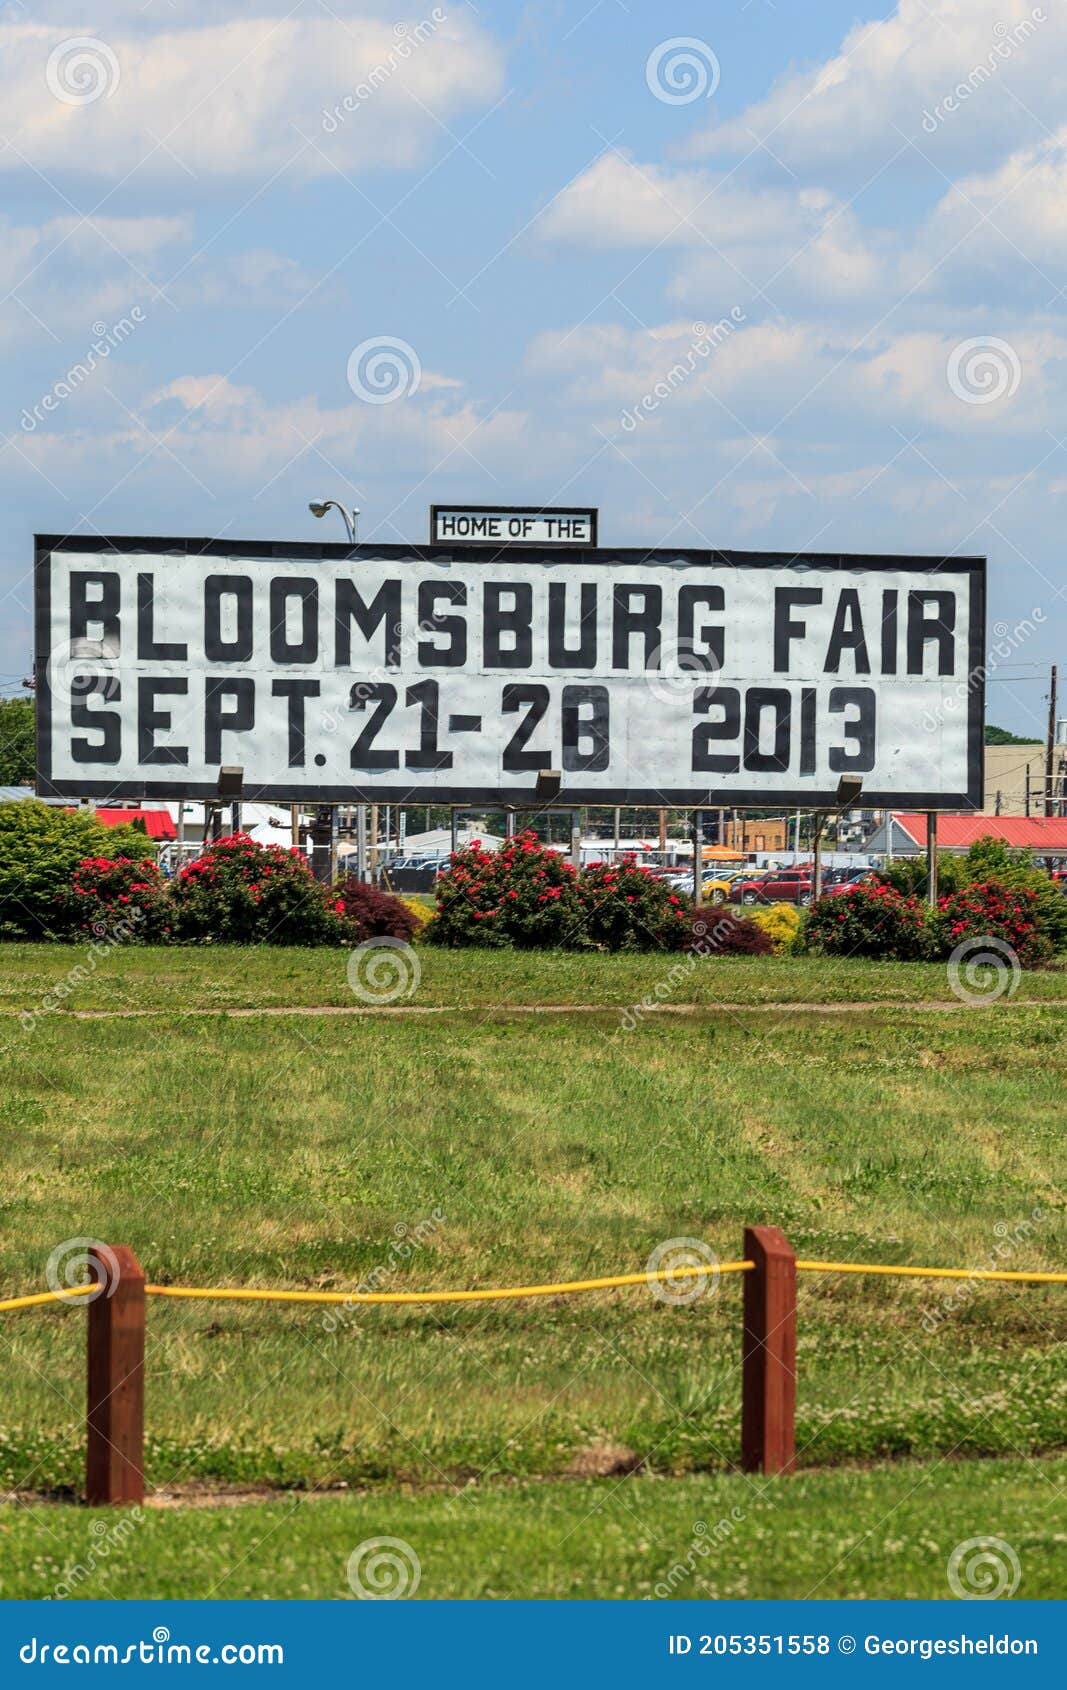 are dogs allowed at bloomsburg fair